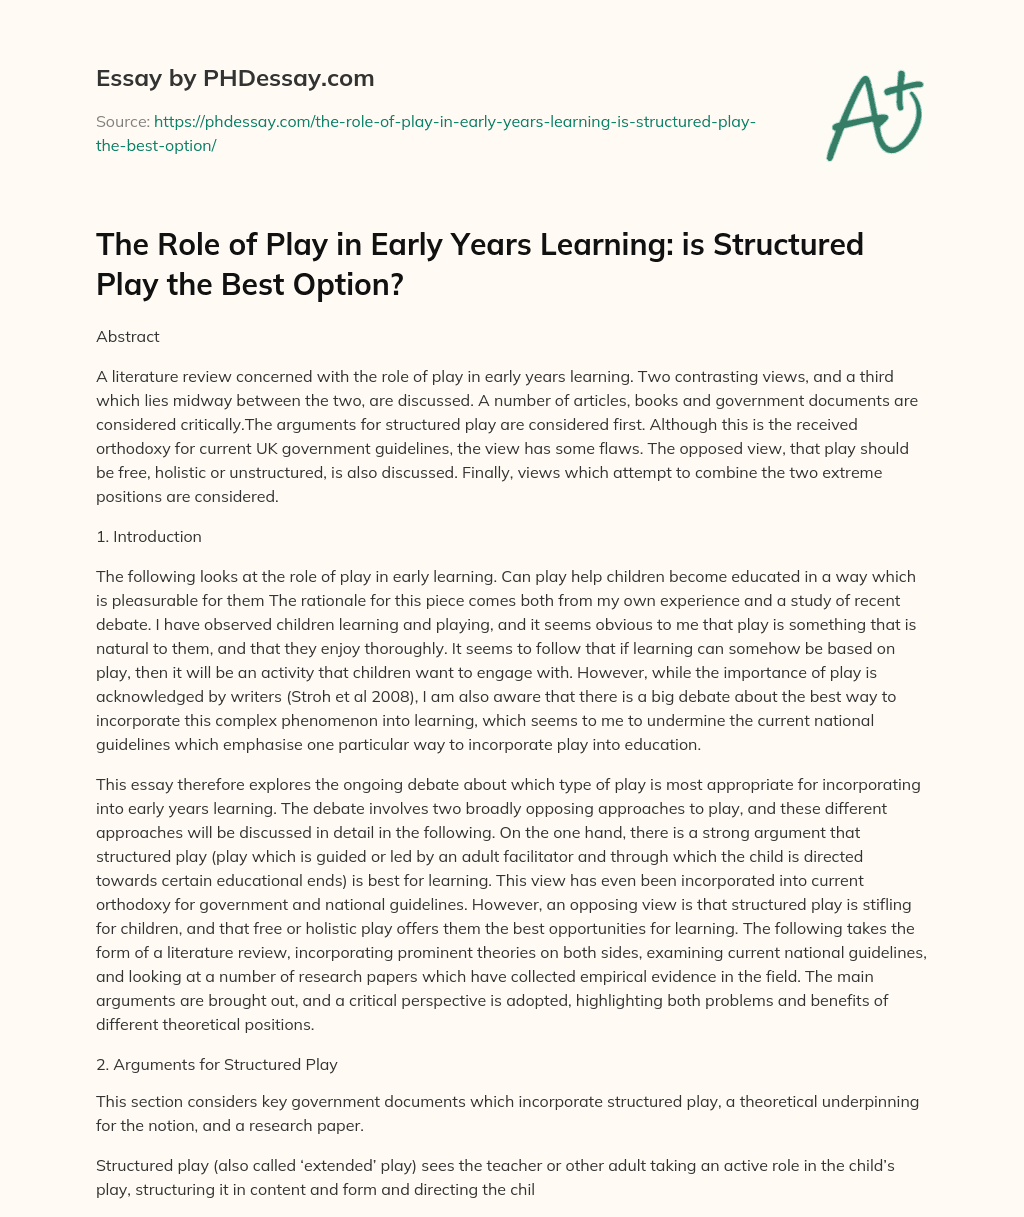 The Role of Play in Early Years Learning: is Structured Play the Best Option? essay